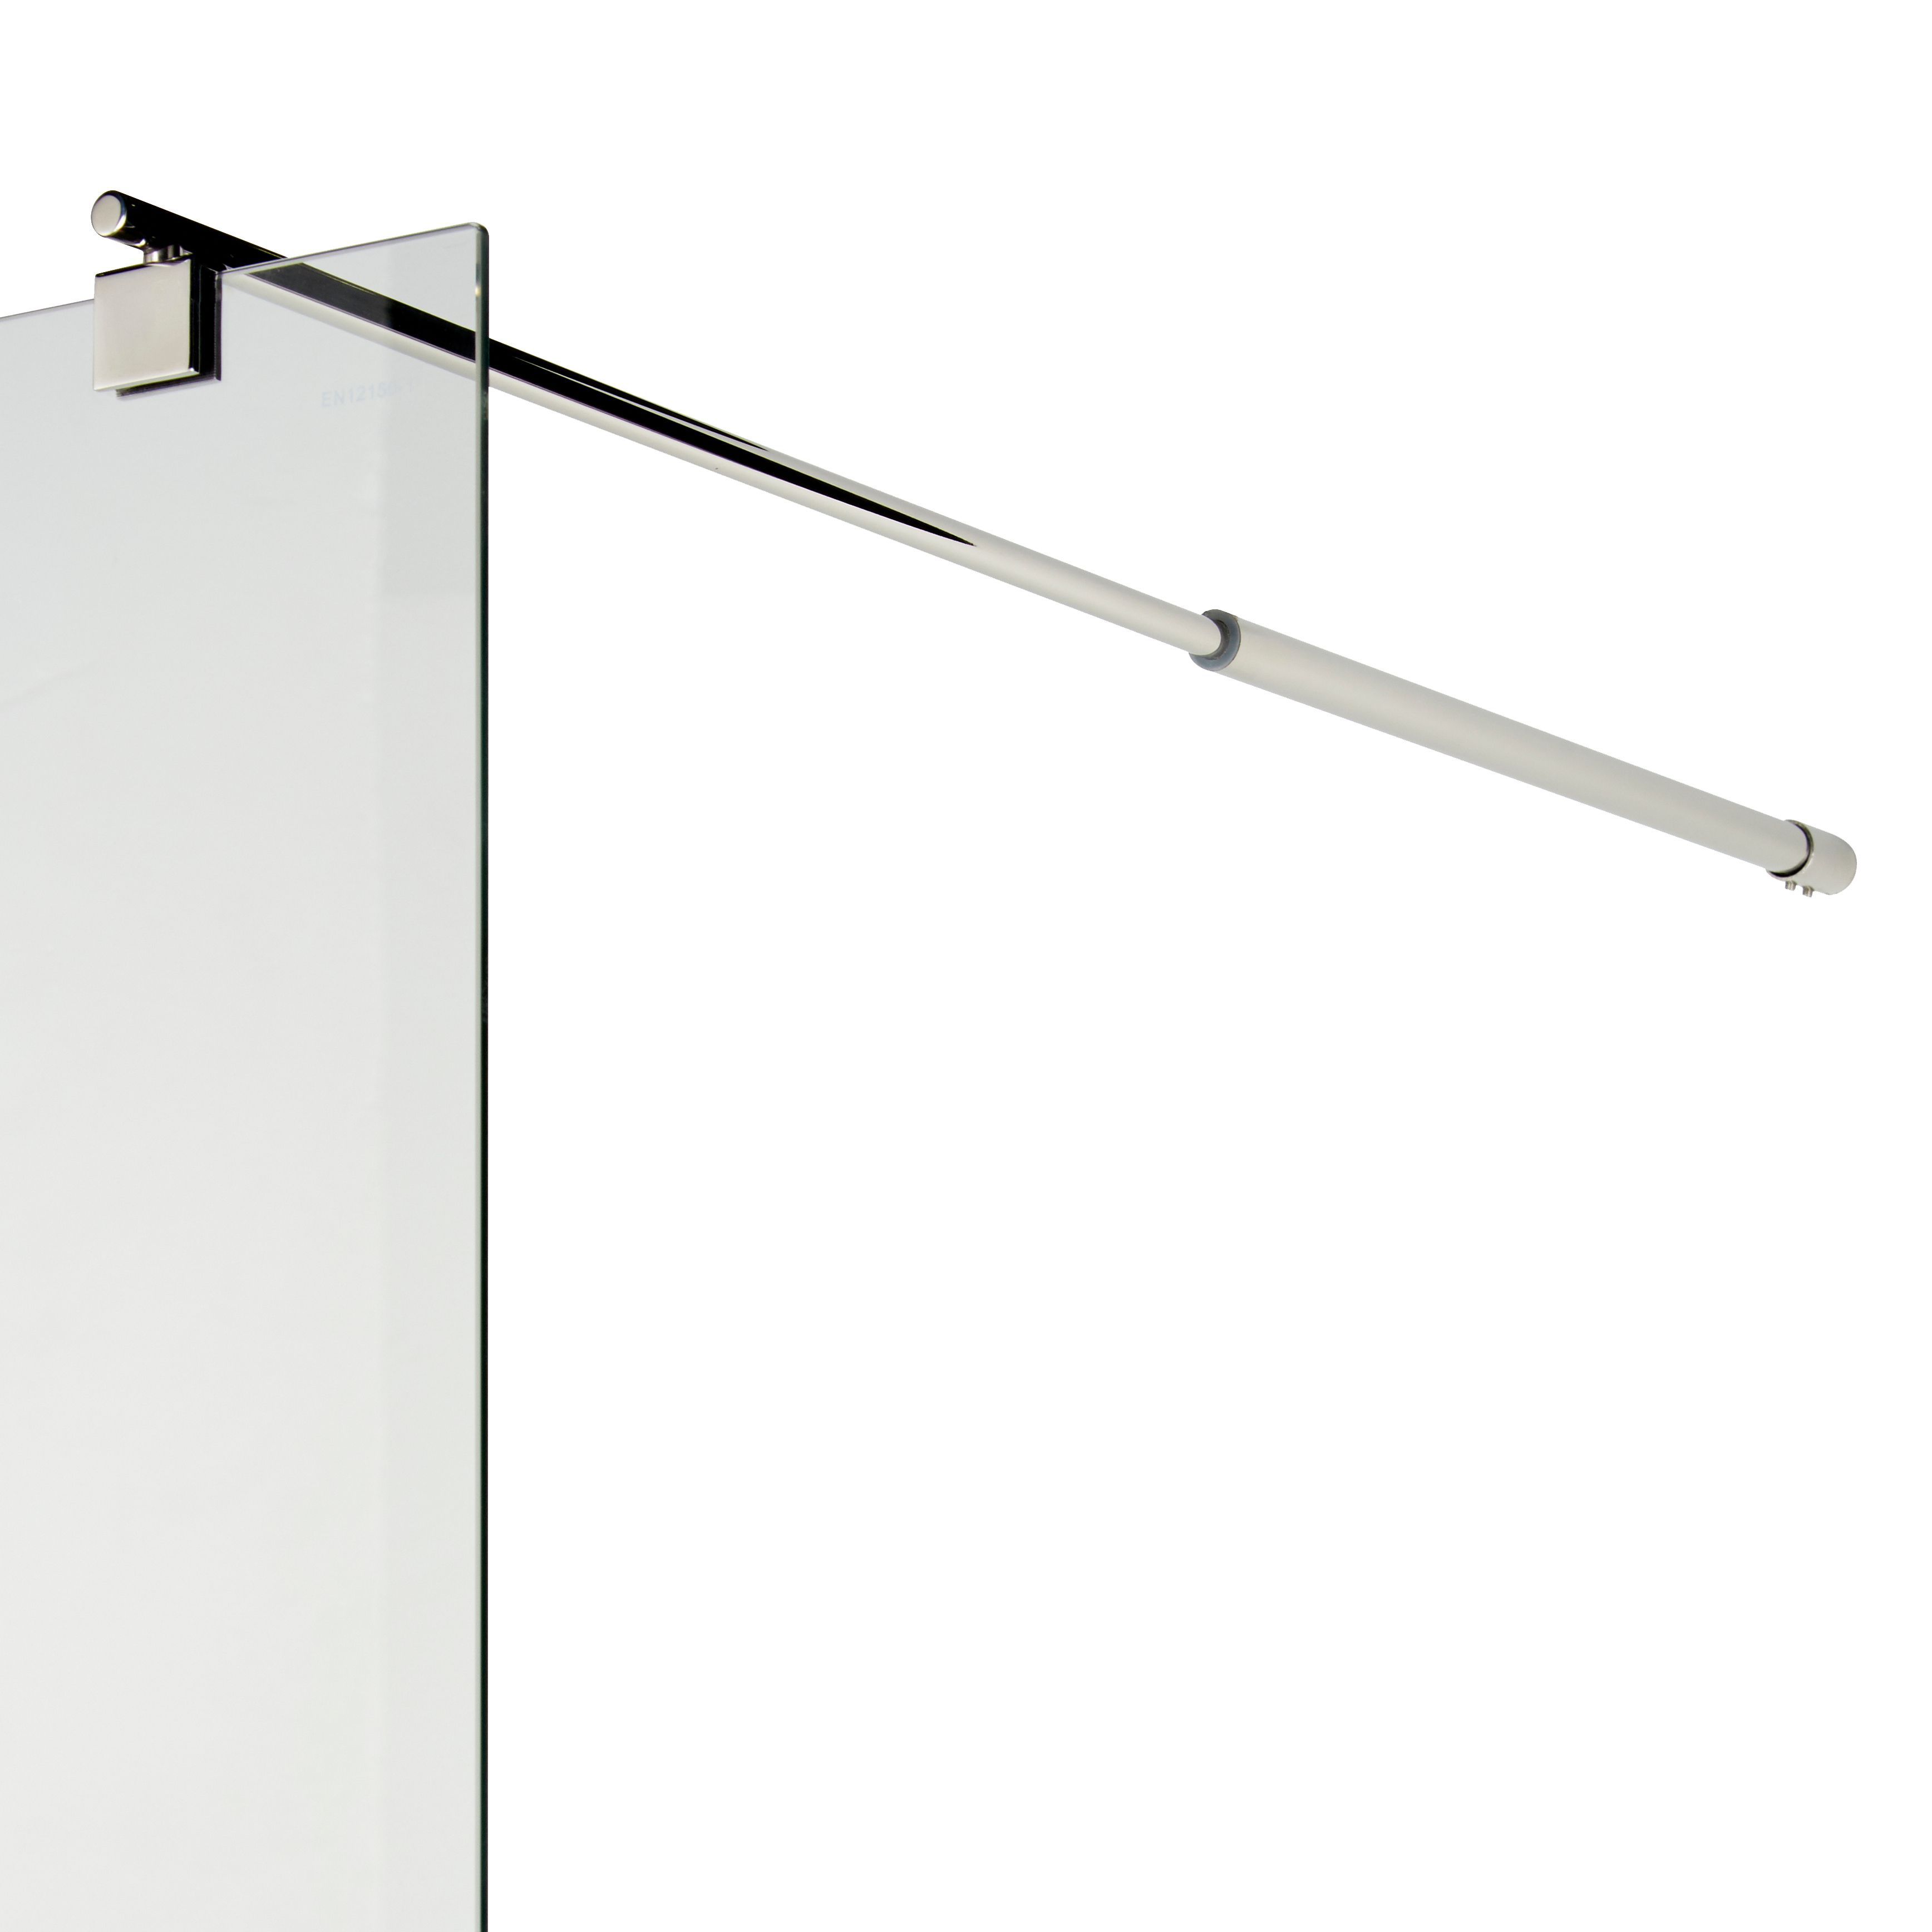 Cooke & Lewis Onega Chrome effect Frosted Walk-in Wet room glass screen & bar (H)195cm (W)90cm